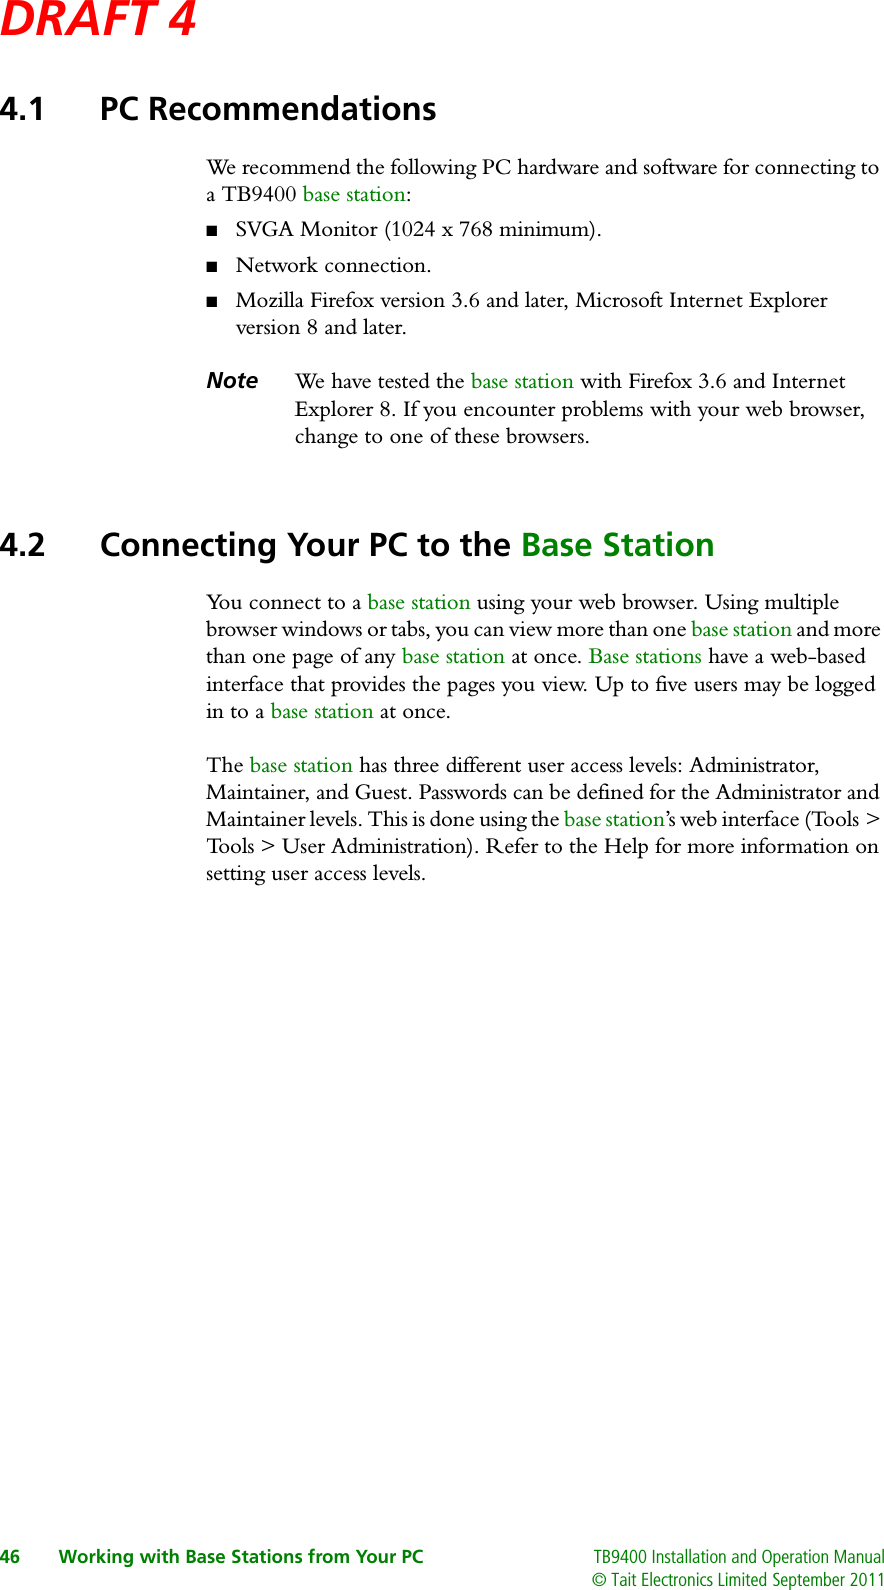 DRAFT 4 46 Working with Base Stations from Your PC TB9400 Installation and Operation Manual© Tait Electronics Limited September 20114.1 PC RecommendationsWe recommend the following PC hardware and software for connecting to a TB9400 base station:■SVGA Monitor (1024 x 768 minimum).■Network connection.■Mozilla Firefox version 3.6 and later, Microsoft Internet Explorer version 8 and later.Note We  h ave  t e s t e d  t h e  base station with Firefox 3.6 and Internet Explorer 8. If you encounter problems with your web browser, change to one of these browsers.4.2 Connecting Your PC to the Base StationYou connect to a base station using your web browser. Using multiple browser windows or tabs, you can view more than one base station and more than one page of any base station at once. Base stations have a web-based interface that provides the pages you view. Up to five users may be logged in to a base station at once.The base station has three different user access levels: Administrator, Maintainer, and Guest. Passwords can be defined for the Administrator and Maintainer levels. This is done using the base station’s web interface (Tools &gt; Tools &gt; User Administration). Refer to the Help for more information on setting user access levels.